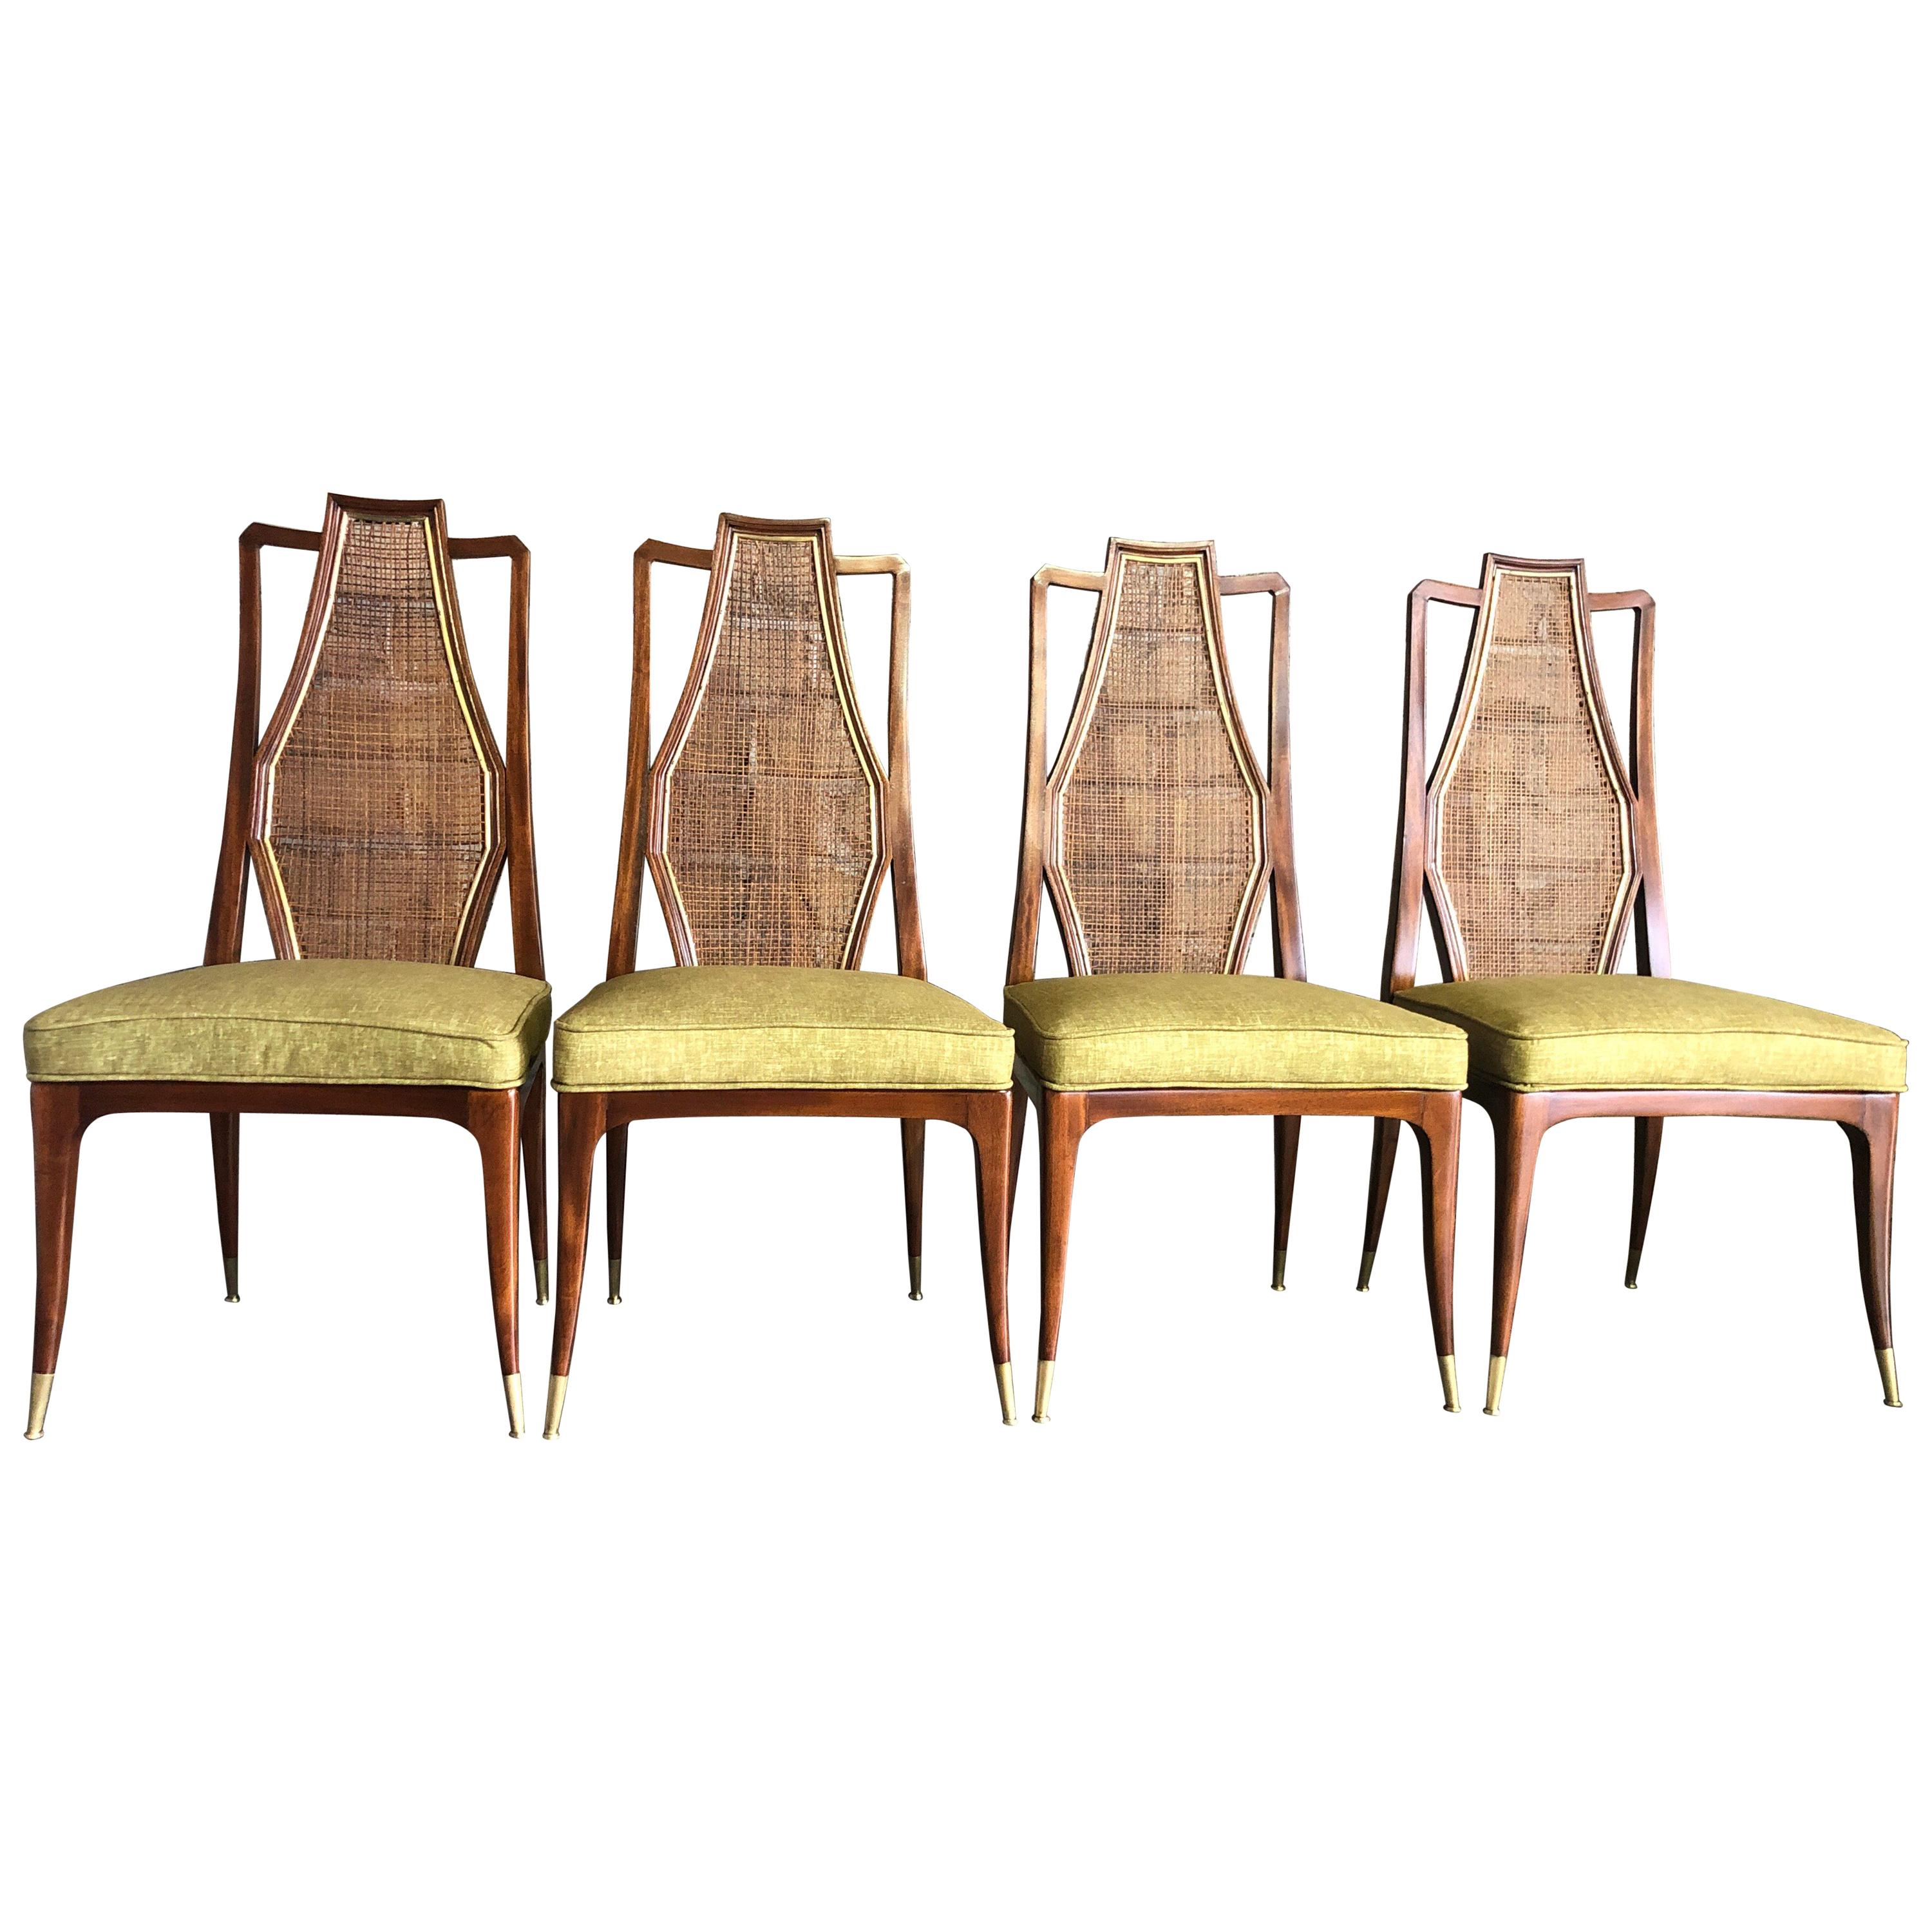 Set of Four Mahogany and Cane Dining Chairs